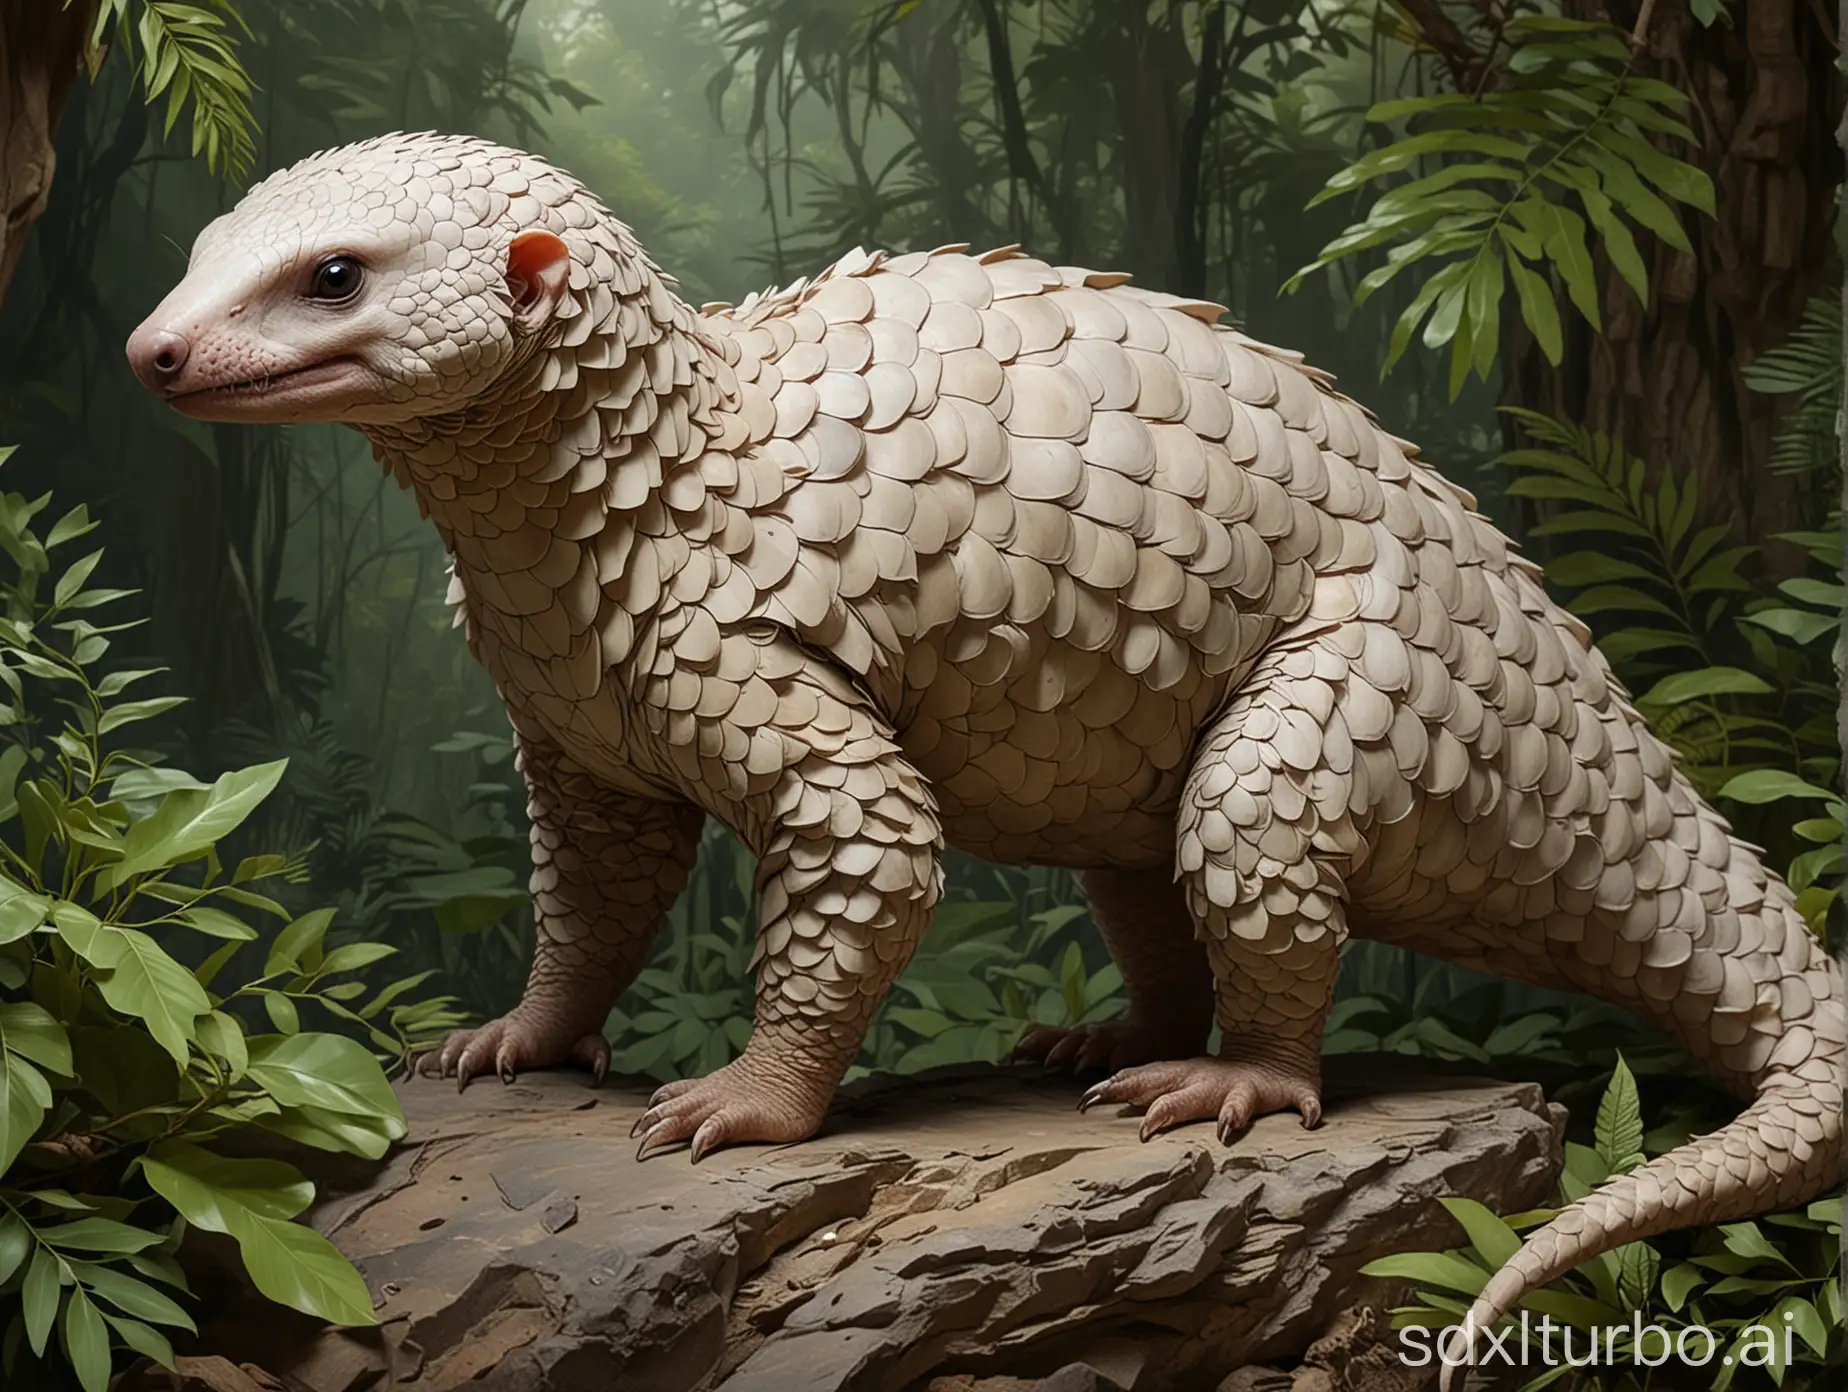 A full body shot of a hybrid creature: anatomy of a pangolin, with body skin of a ferret, With a background of a jade-rocky rainforest, in the style of painting by Leyendecker.